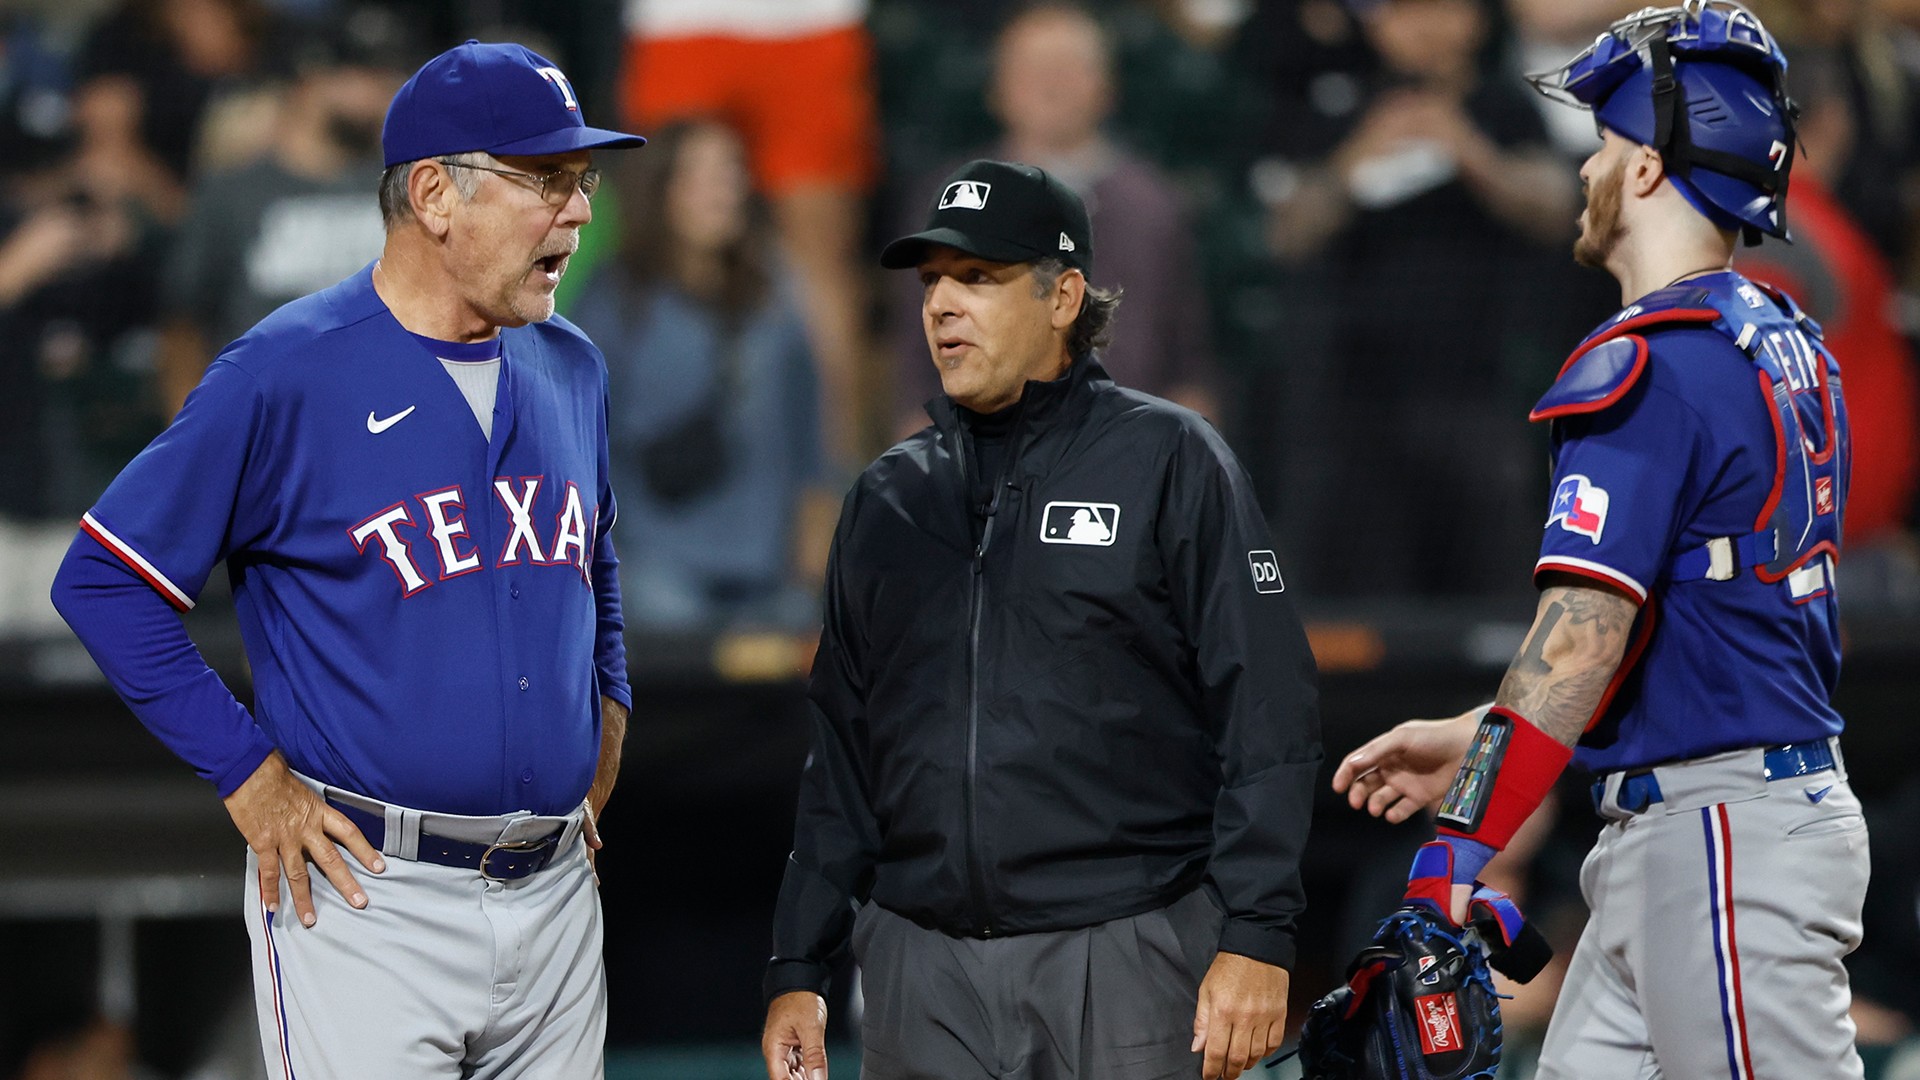 Rangers' Bruce Bochy dissatisfied with rule clarification – NBC